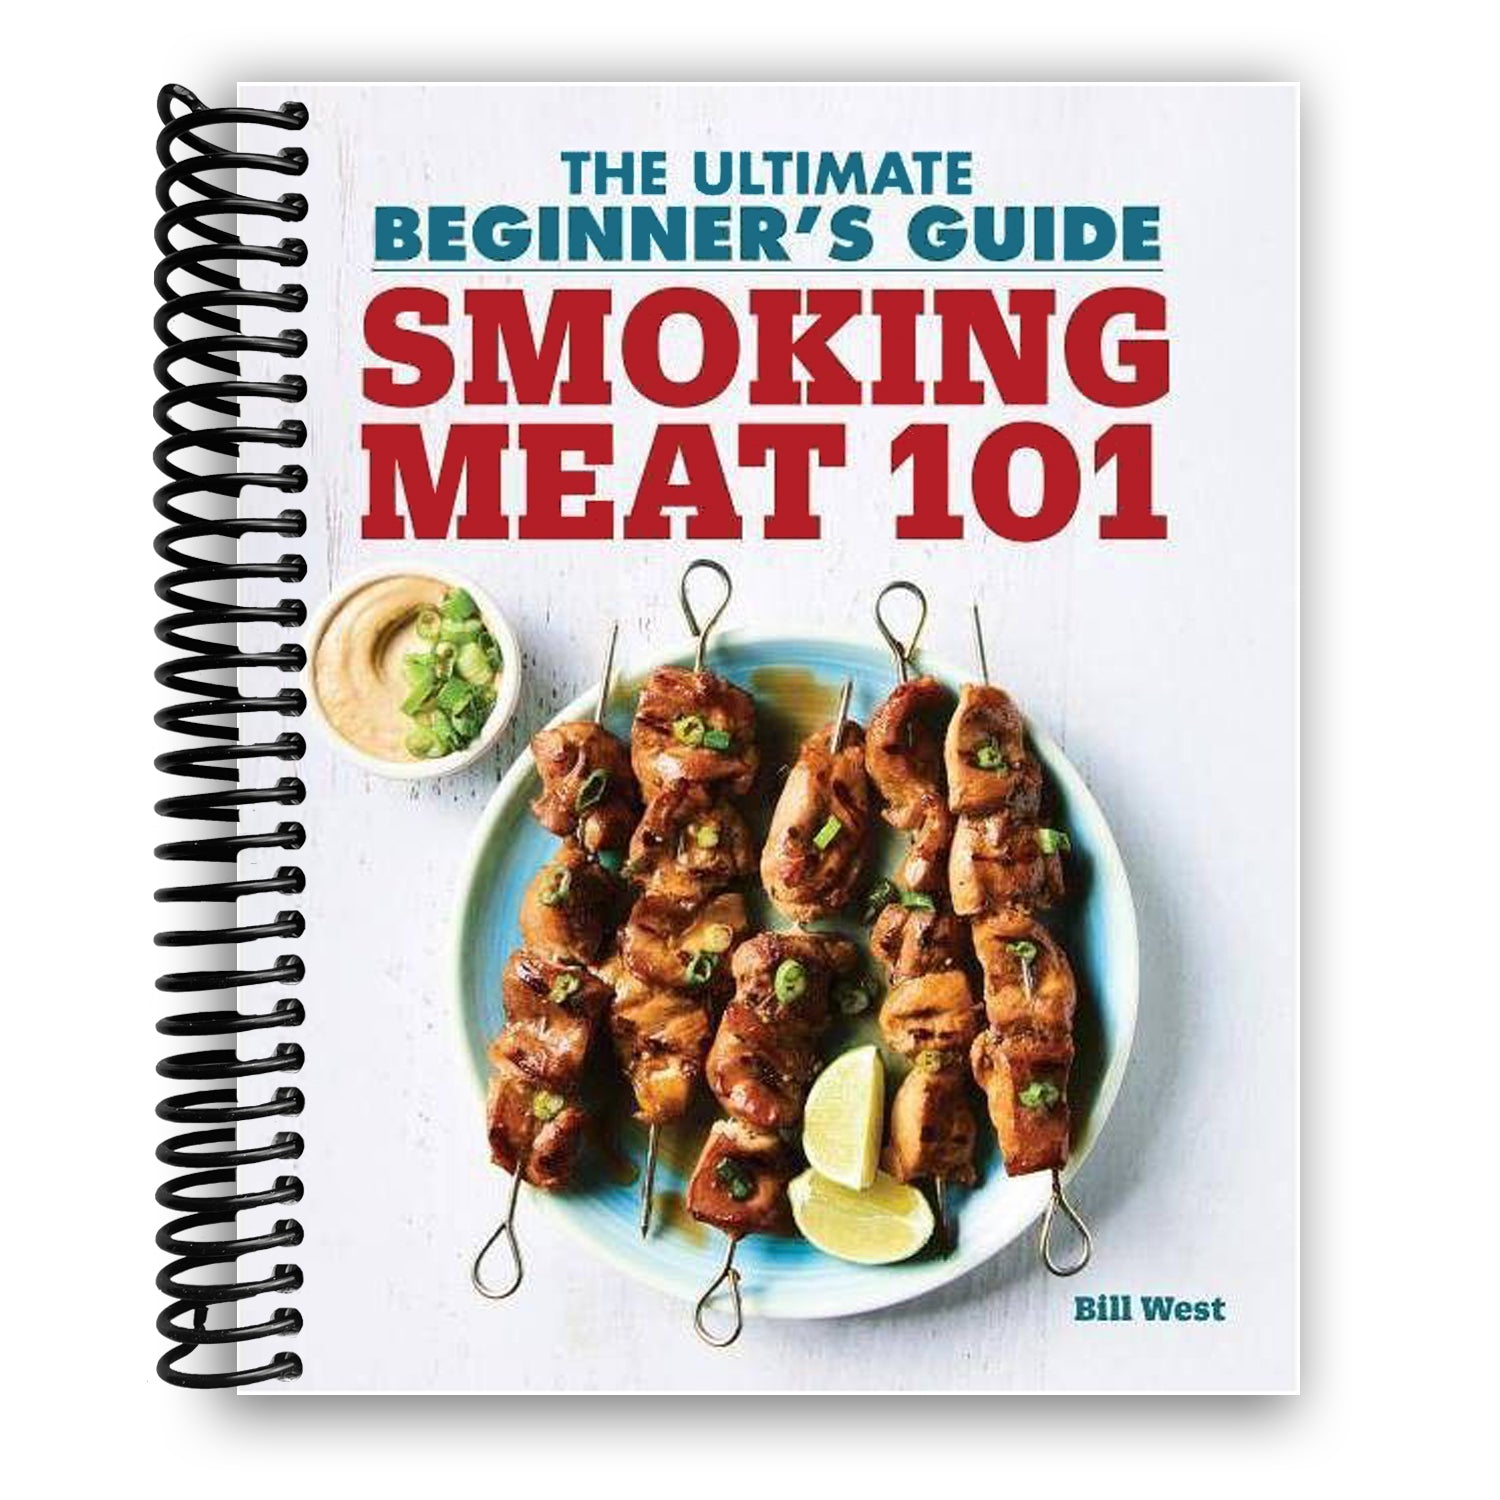 A Beginner's Guide to Using a Smoker